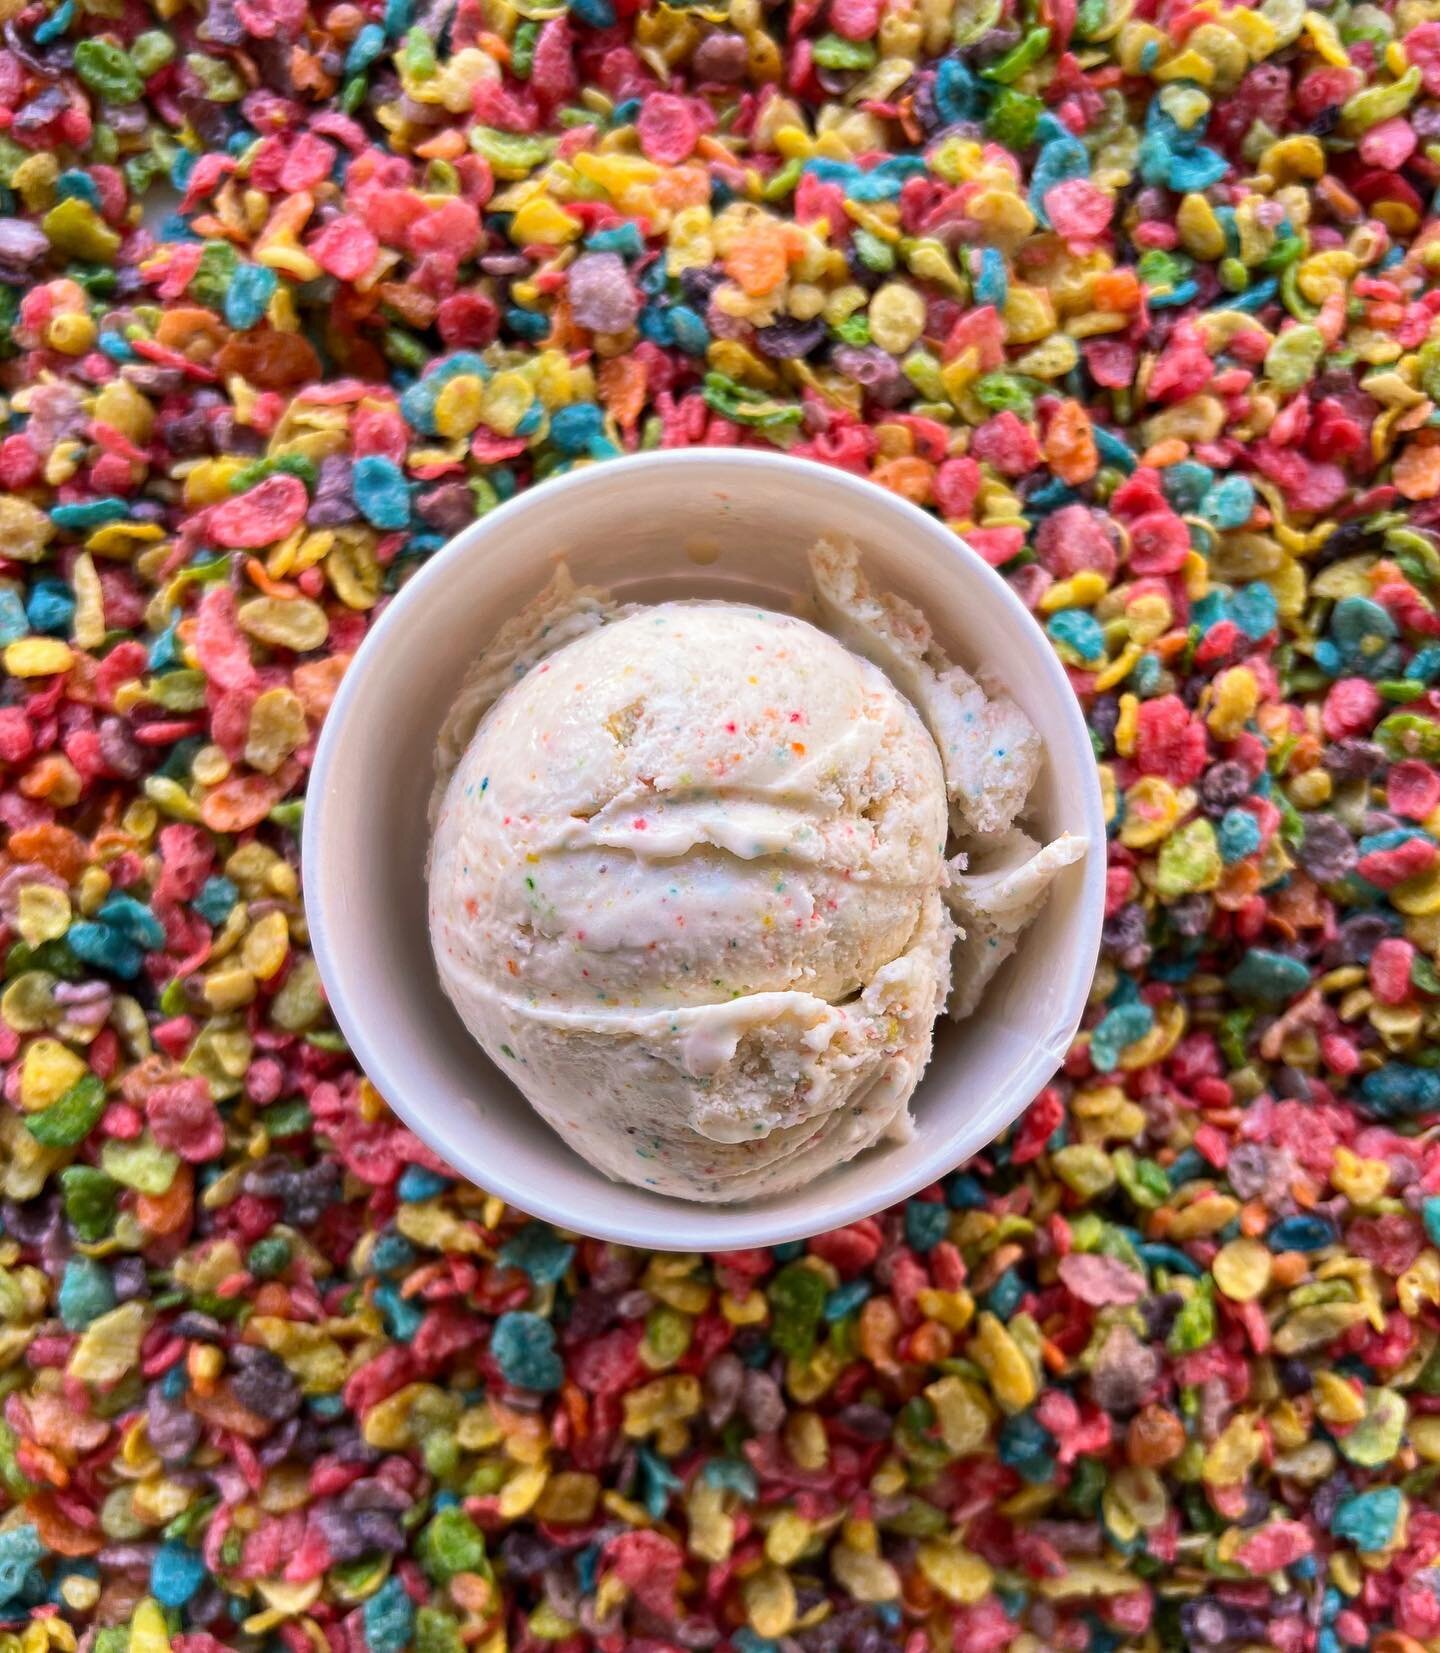 Brighten your day with a colorful scoop of Fruity Pebbles 🌈 
.
.
.
.
.
.
.
.
.
.
.
.
.
.
.
.
.
.
.
.
.
#oakland #oaklandeats #icecream #fruitypebbles #desserts #eastbayeats #bayareaeats #bayareafoodie #foodphotography #sweetooth #supportsmallbusines